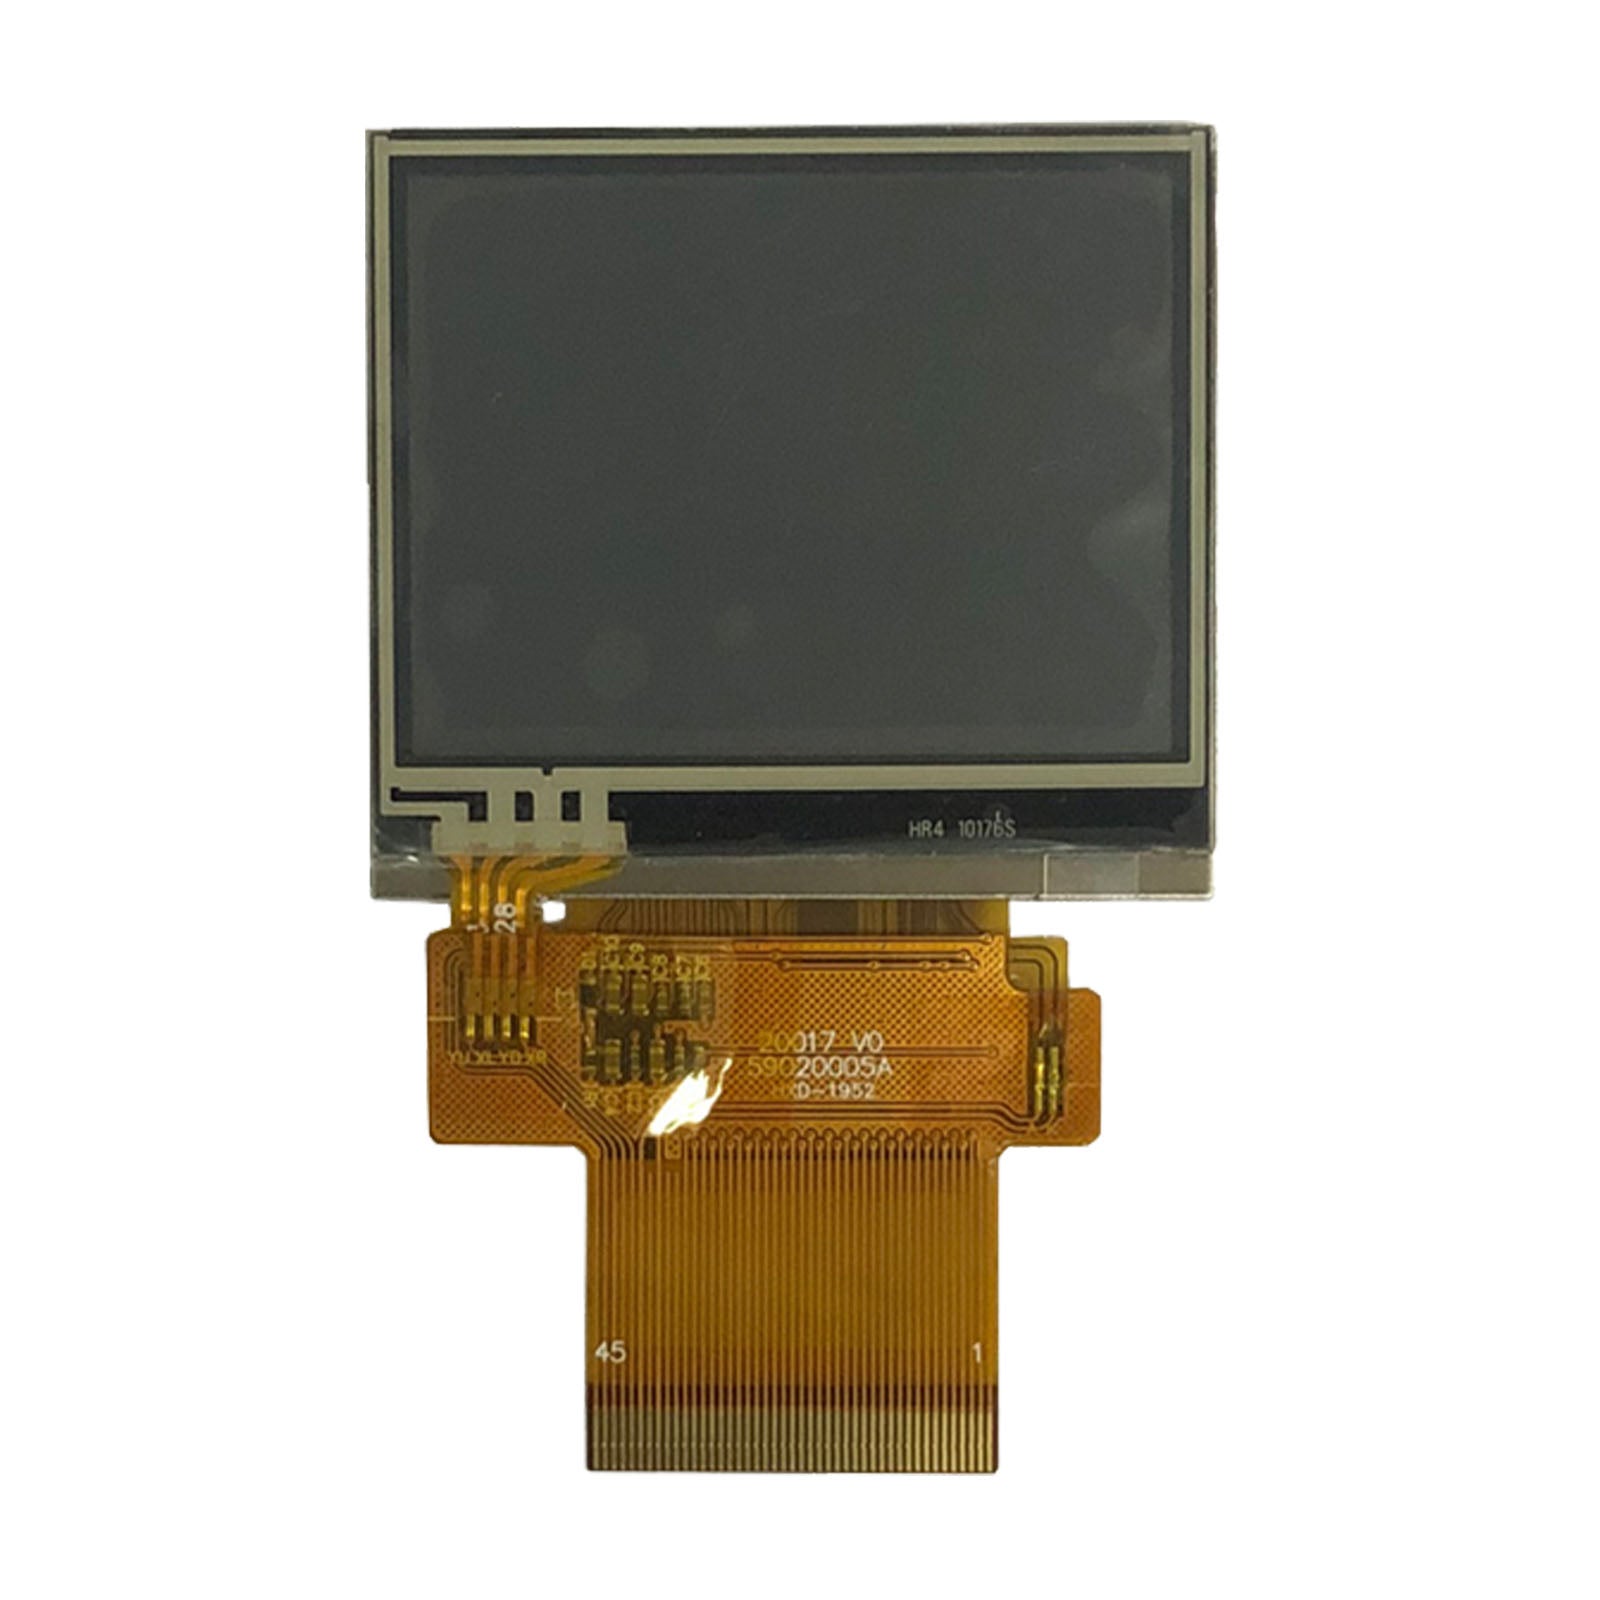 2.0 inch 320x240 TFT transflective display with resistive touch, MCU, SPI, and RGB interfaces